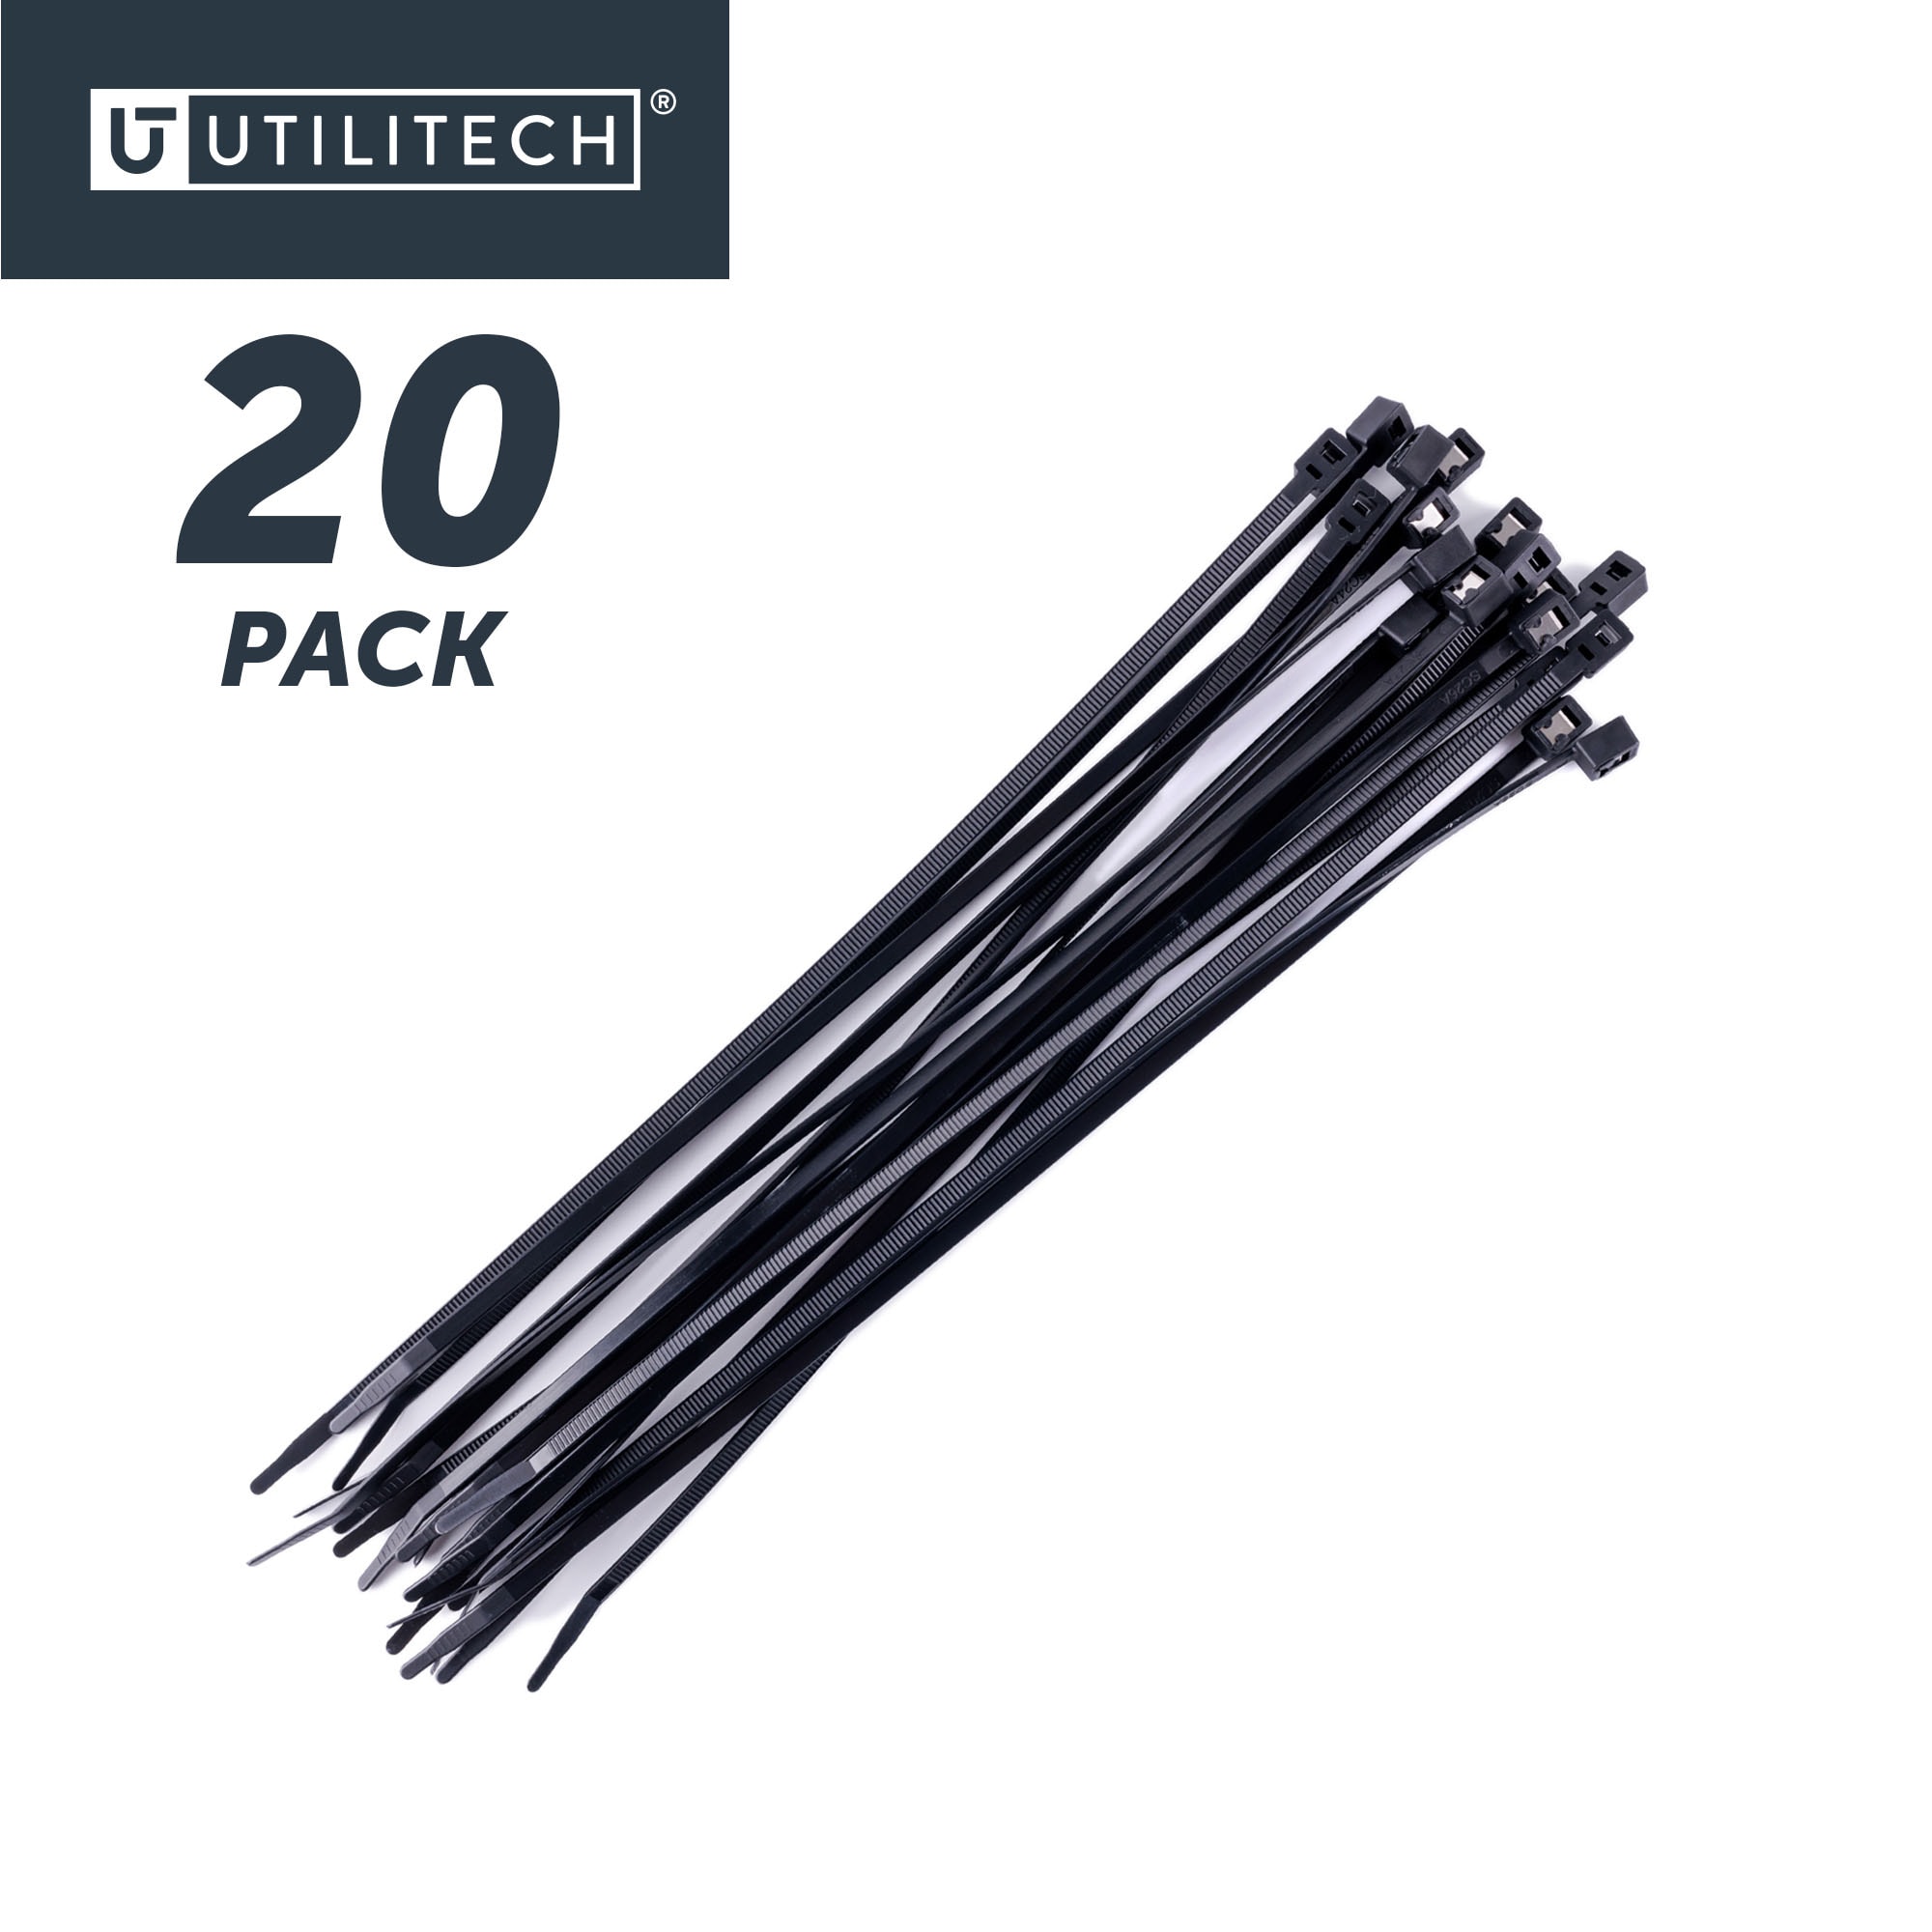 Utilitech 11-in Nylon Twist and Cut Cable Ties Black with Uv Protection ...